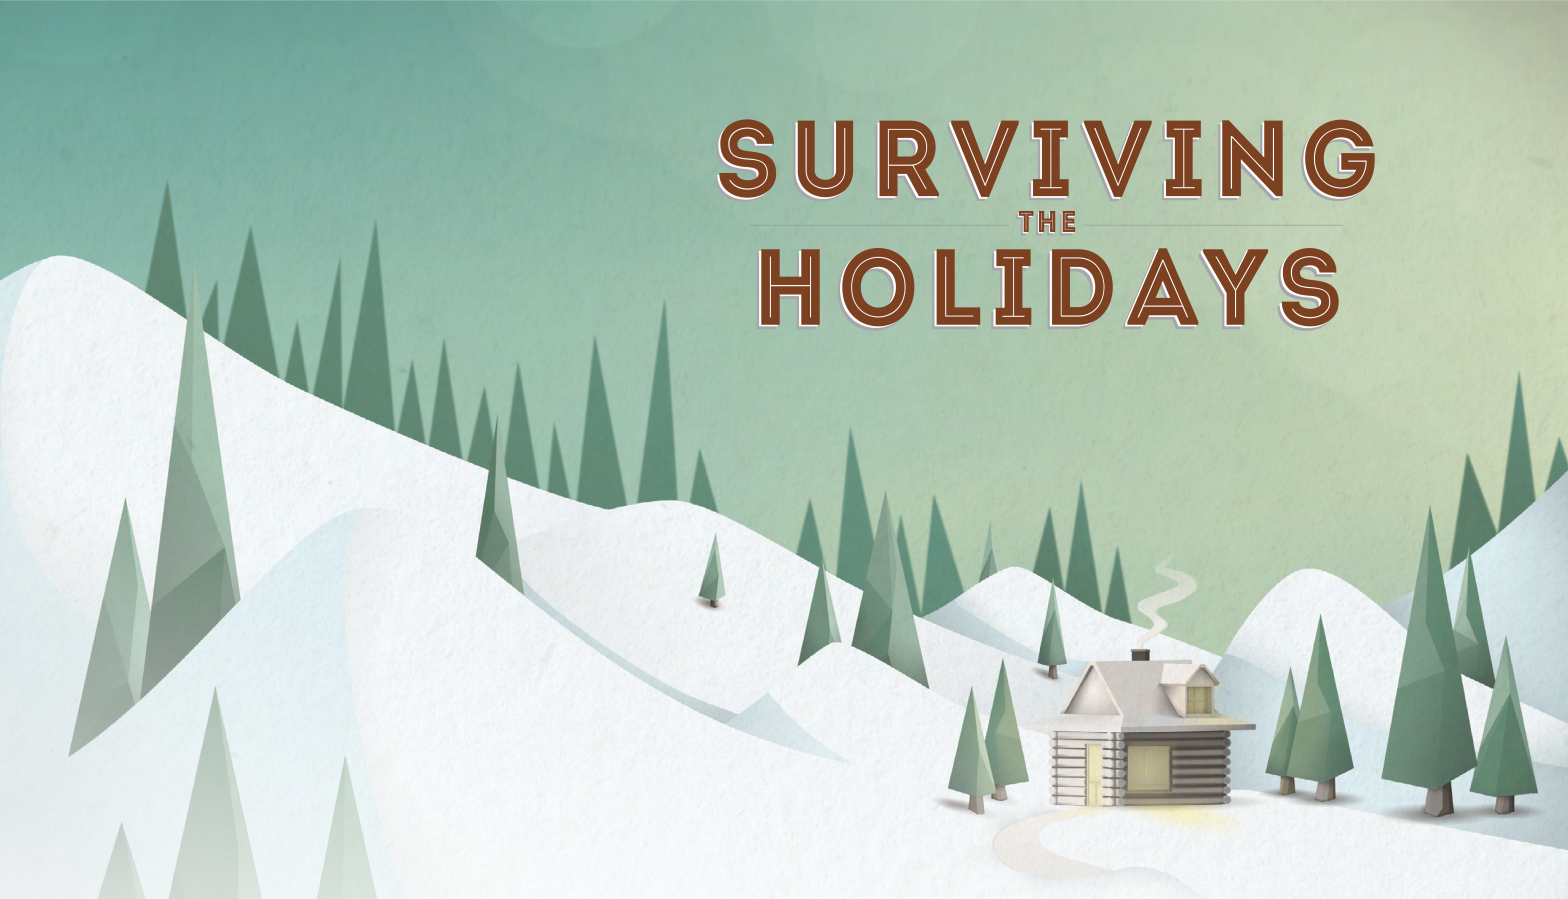 Surviving the Holidays image